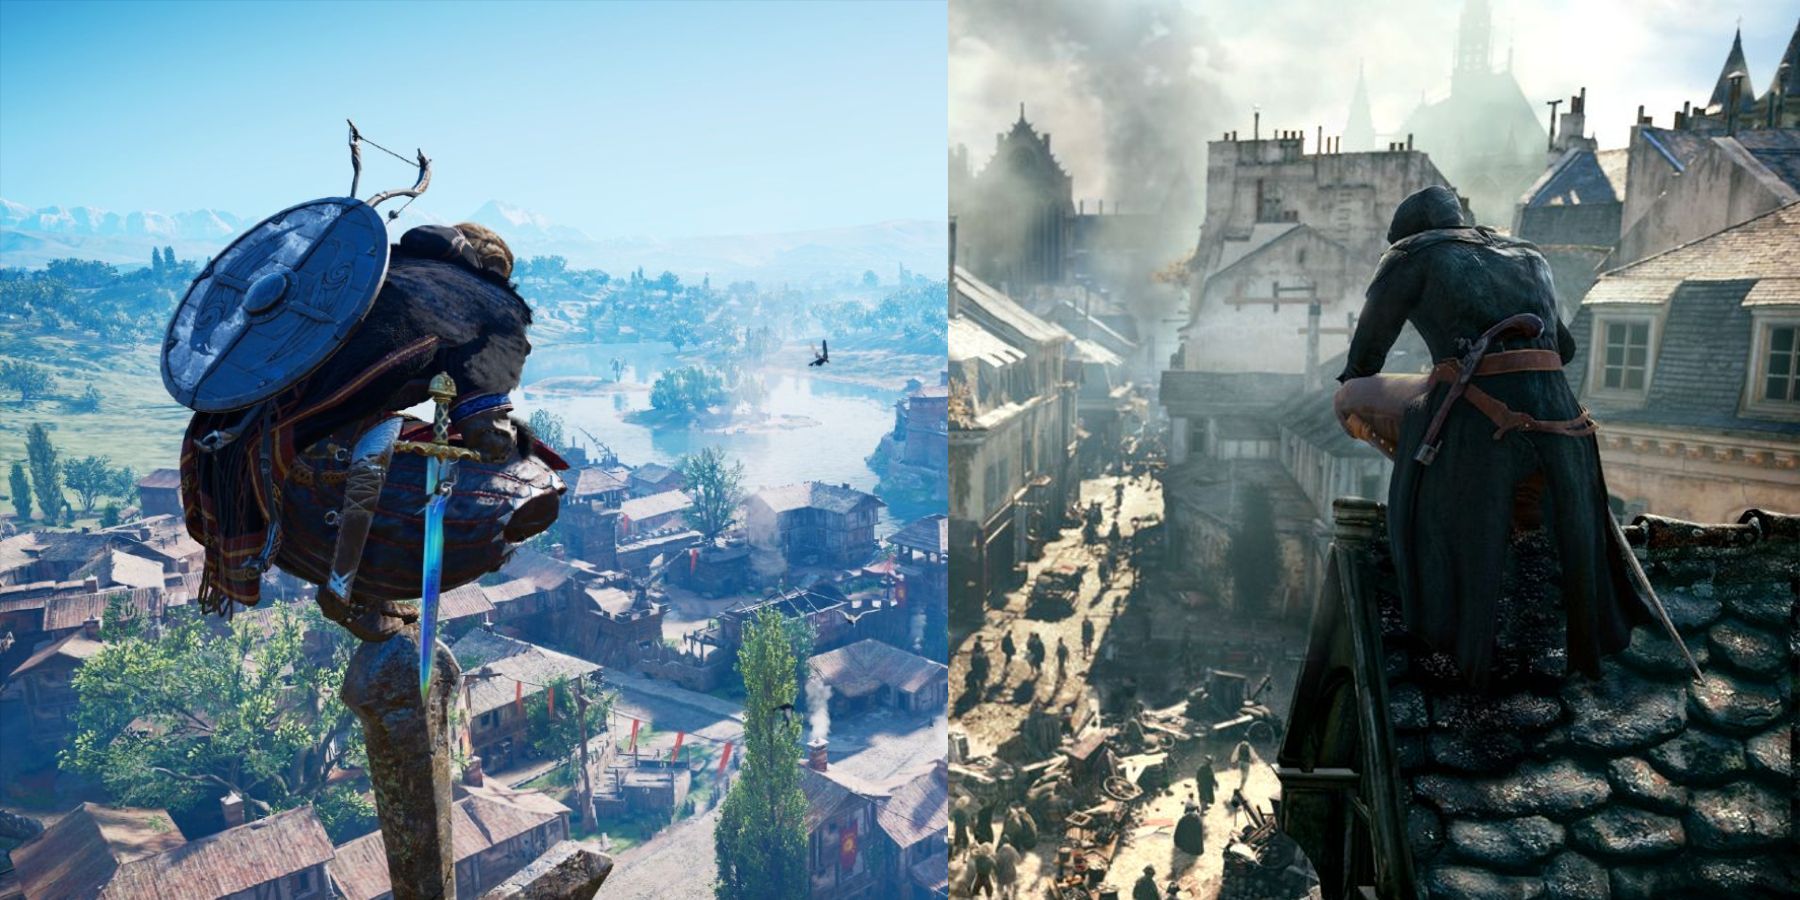 Så mange Cruelty Mus Comparing Assassin's Creed Valhalla: The Siege of Paris' France to AC Unity